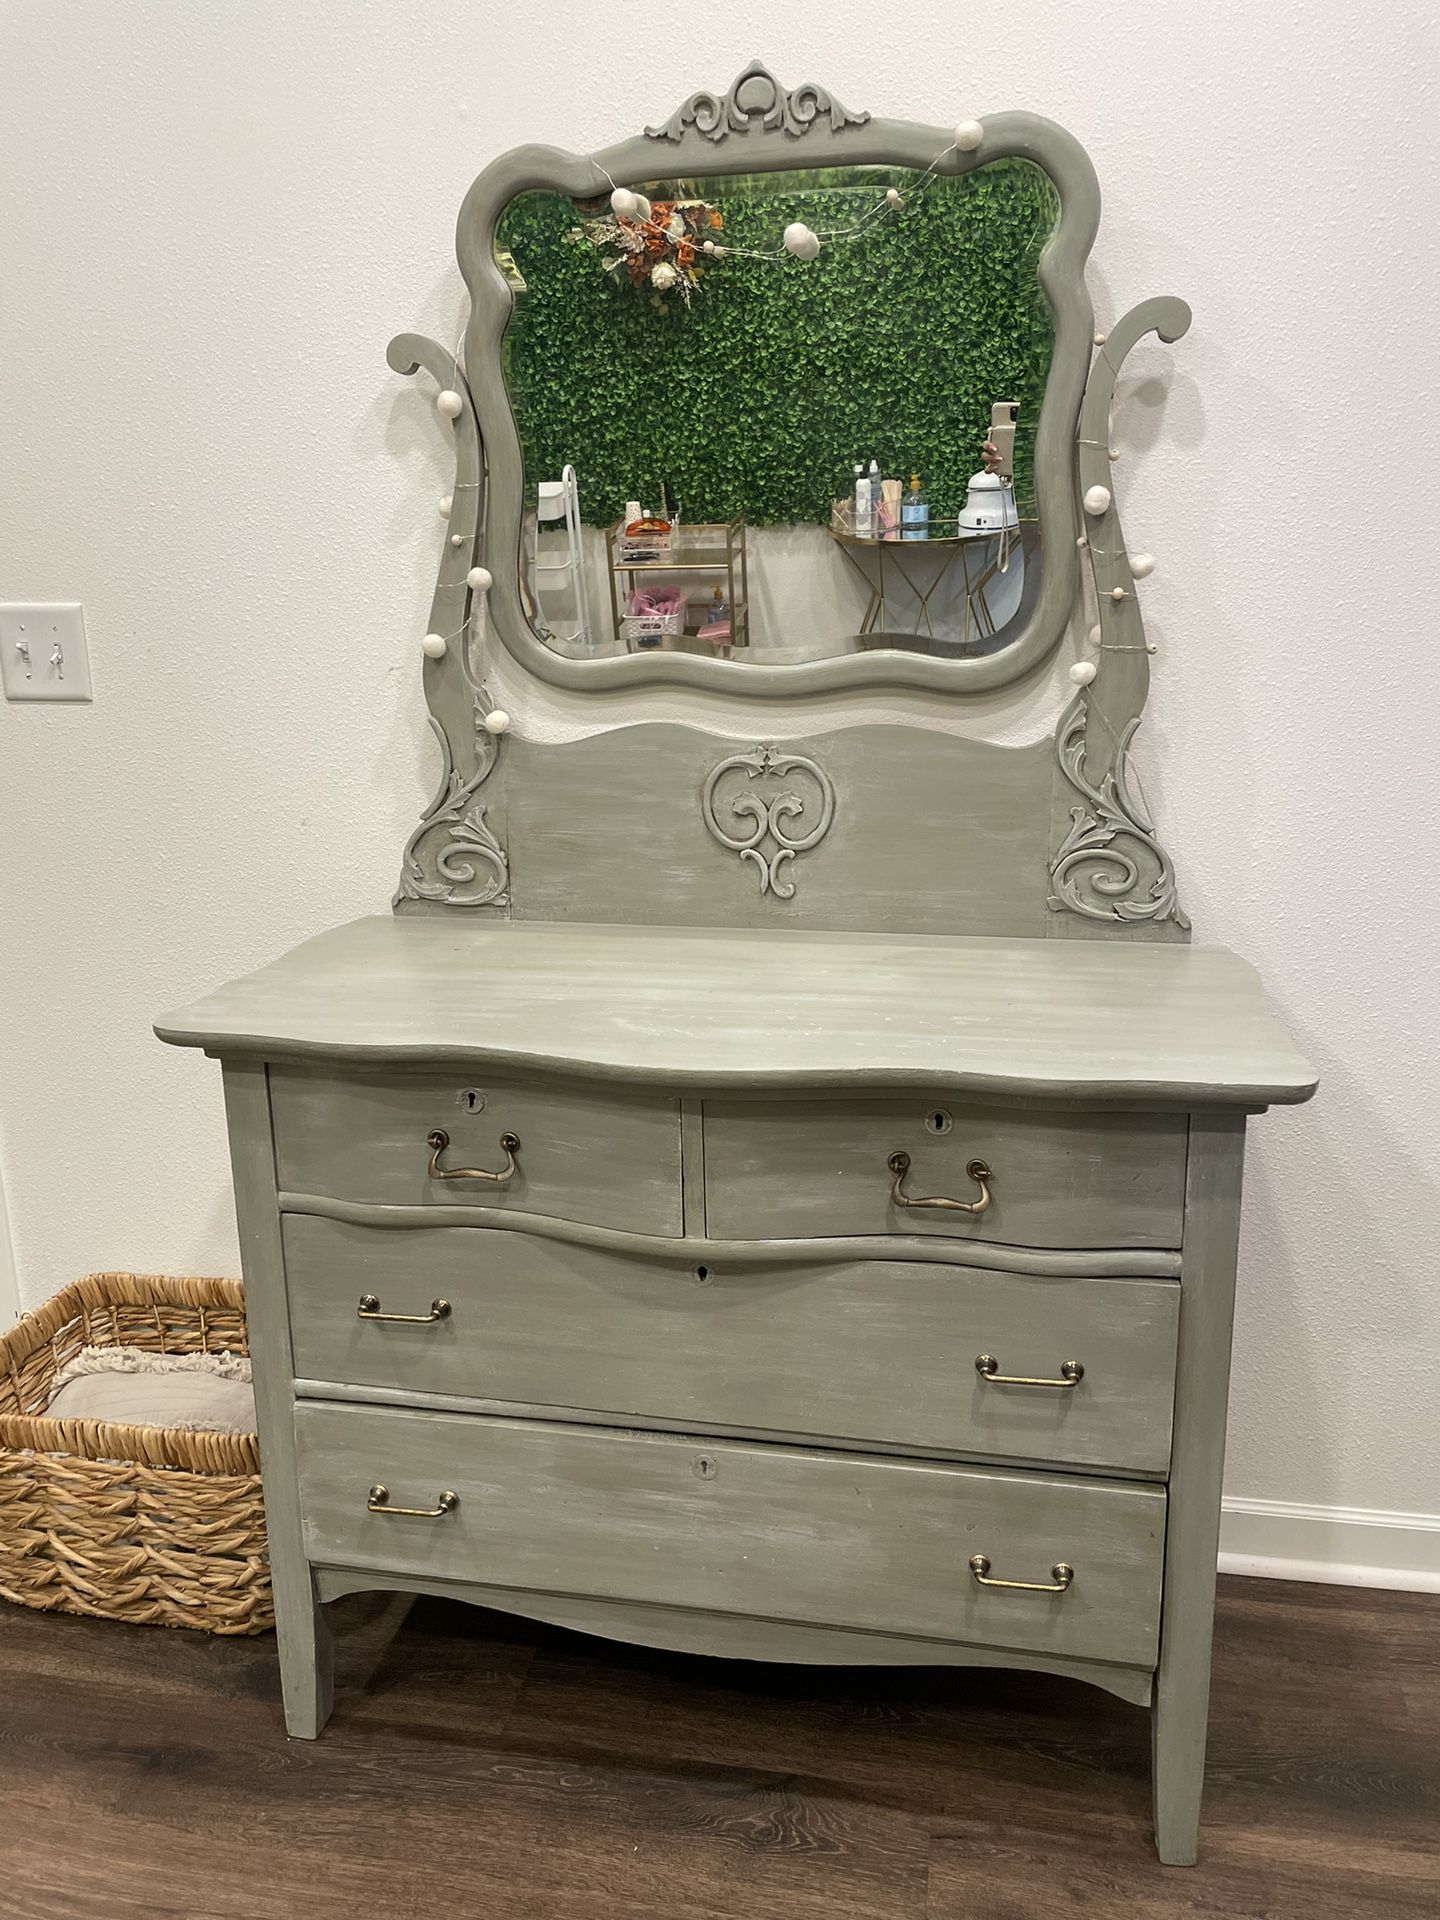 Perfect Condition! Refinished Vintage Dresser and Mirror in Green